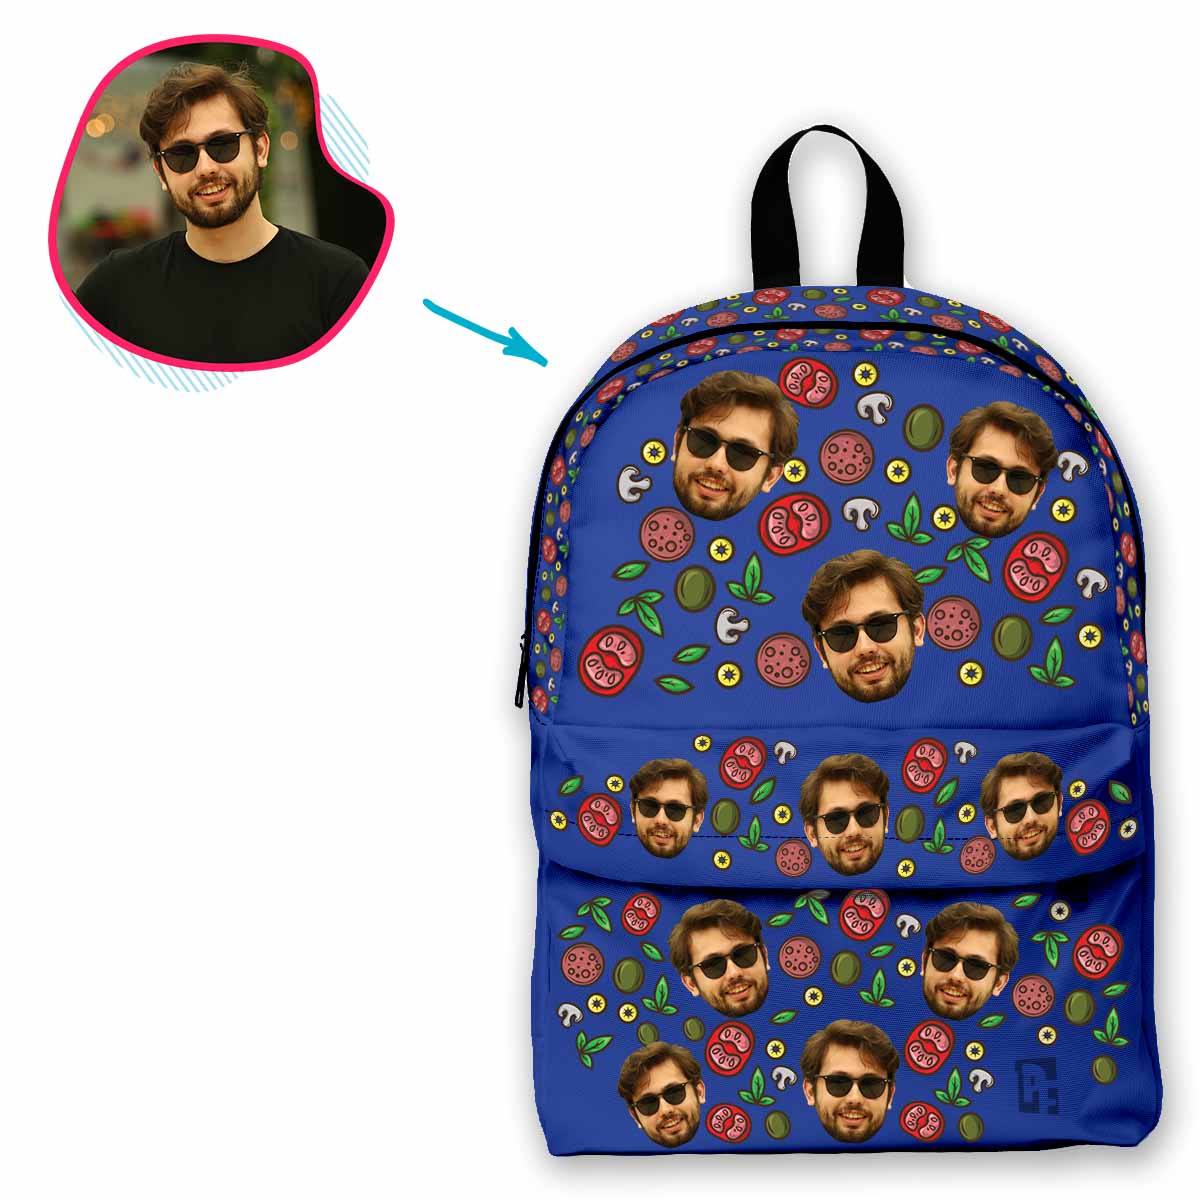 darkblue Pizza classic backpack personalized with photo of face printed on it